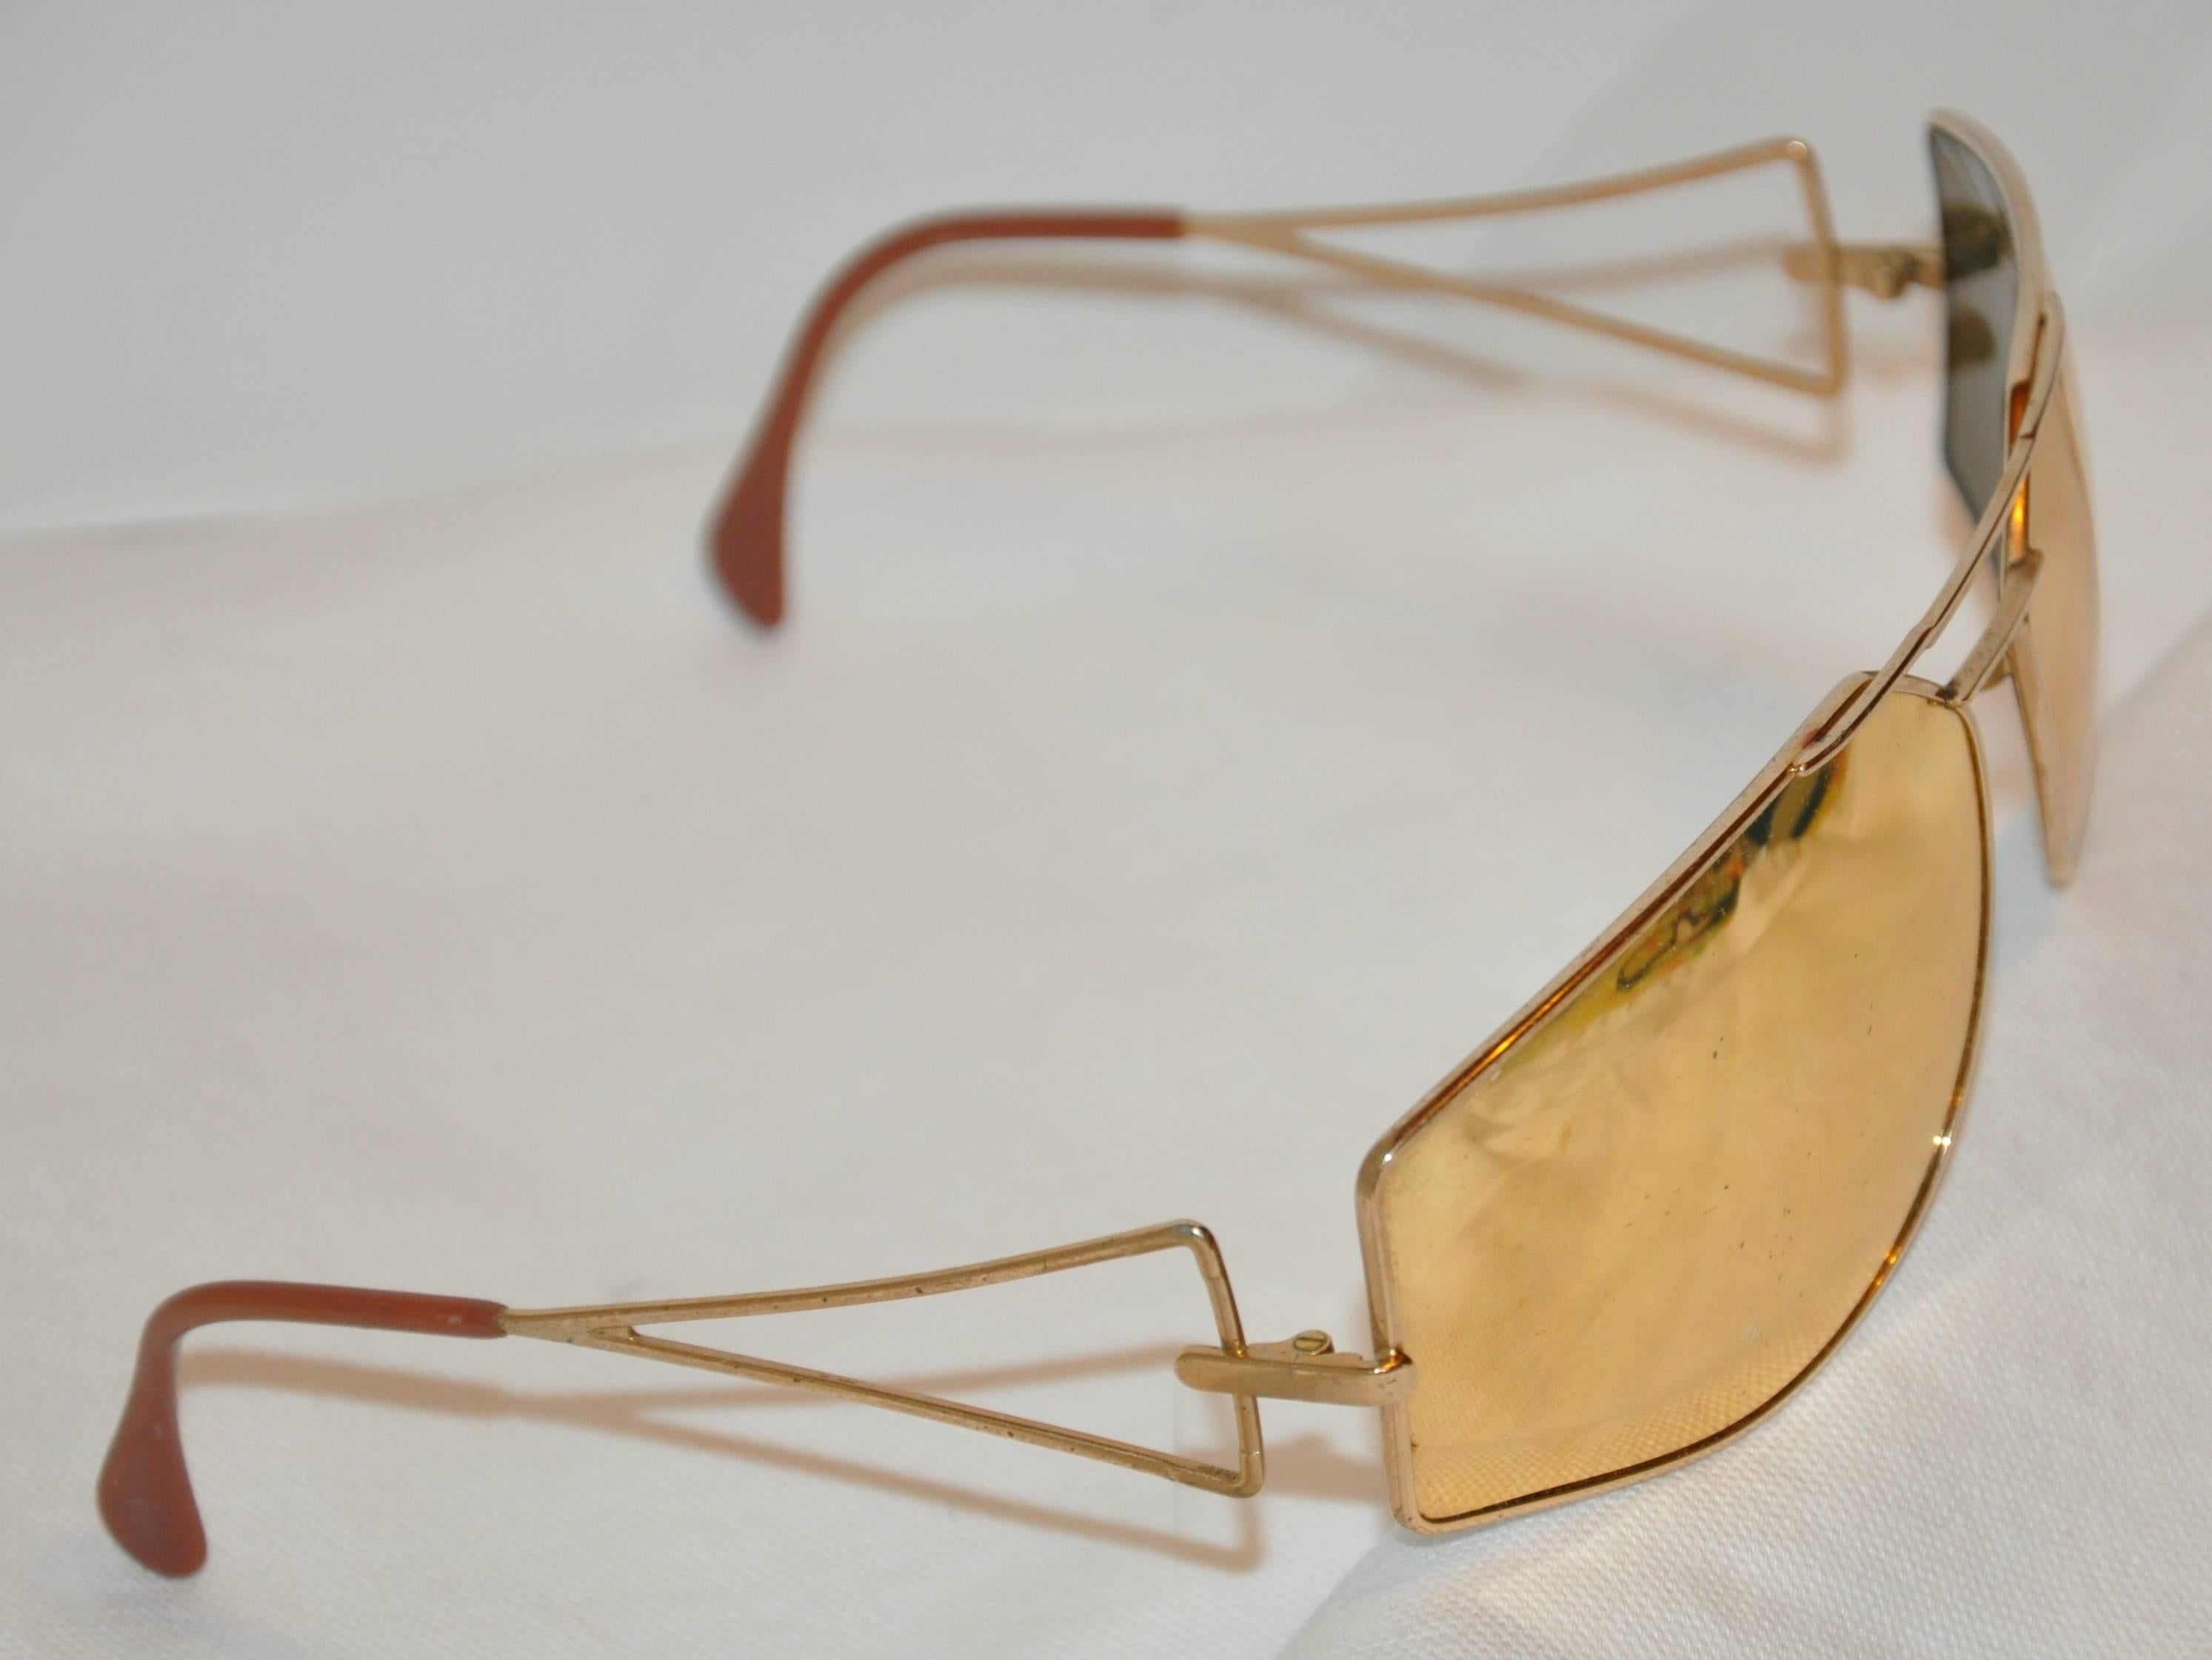        Silhouette large gilded gold vermeil hardware frame sunglasses are finished with gold mirrored lens and measures 5 5/8 inches across the front. The height measures 2 inches, with arms at 4 1/2 in length. Made in Austria.